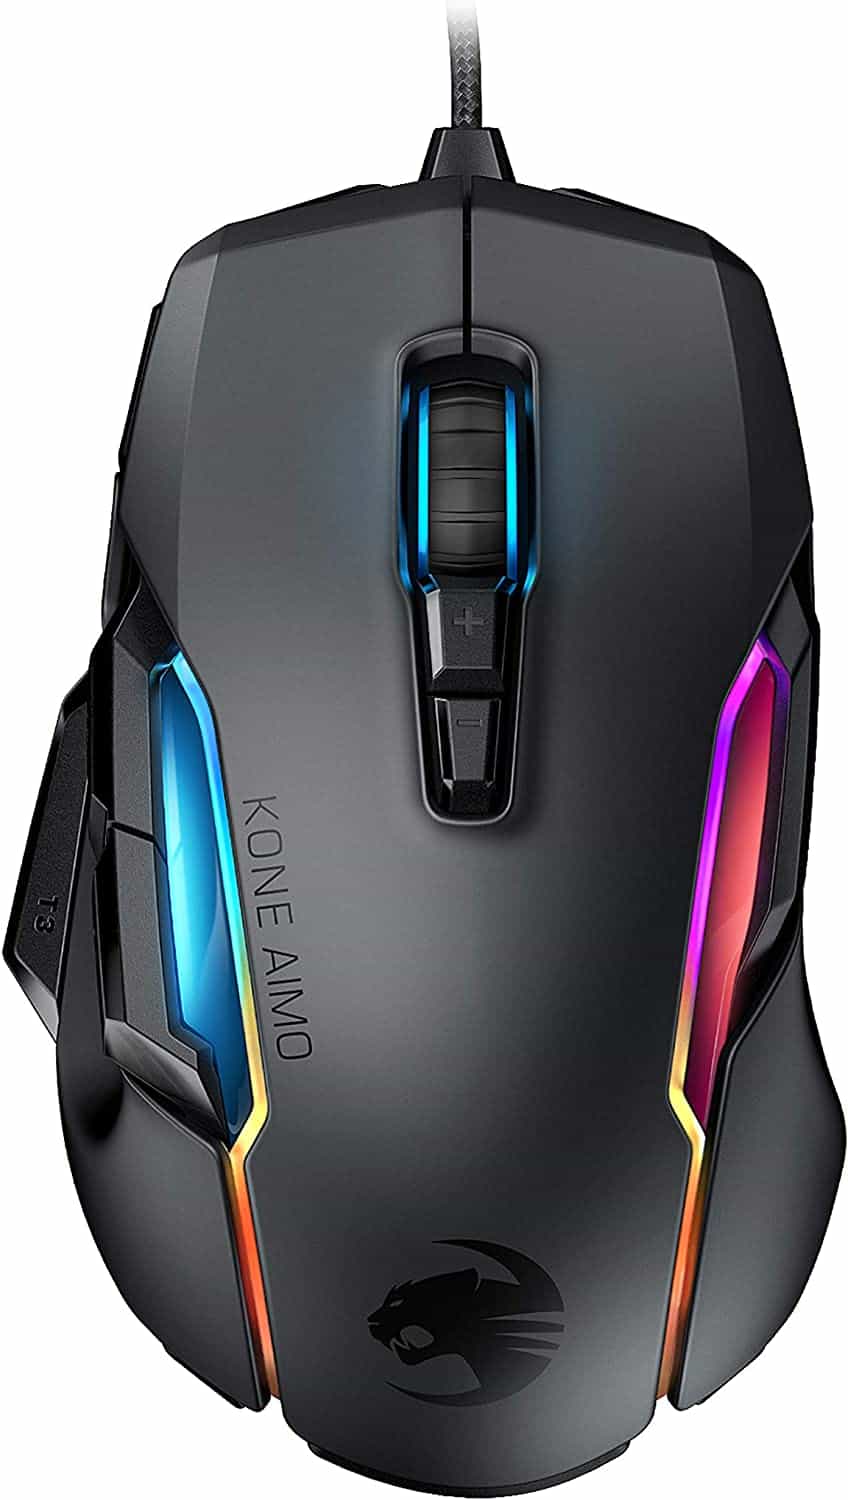 Best RBG drag clicking mouse - Roccat Kone Aimo